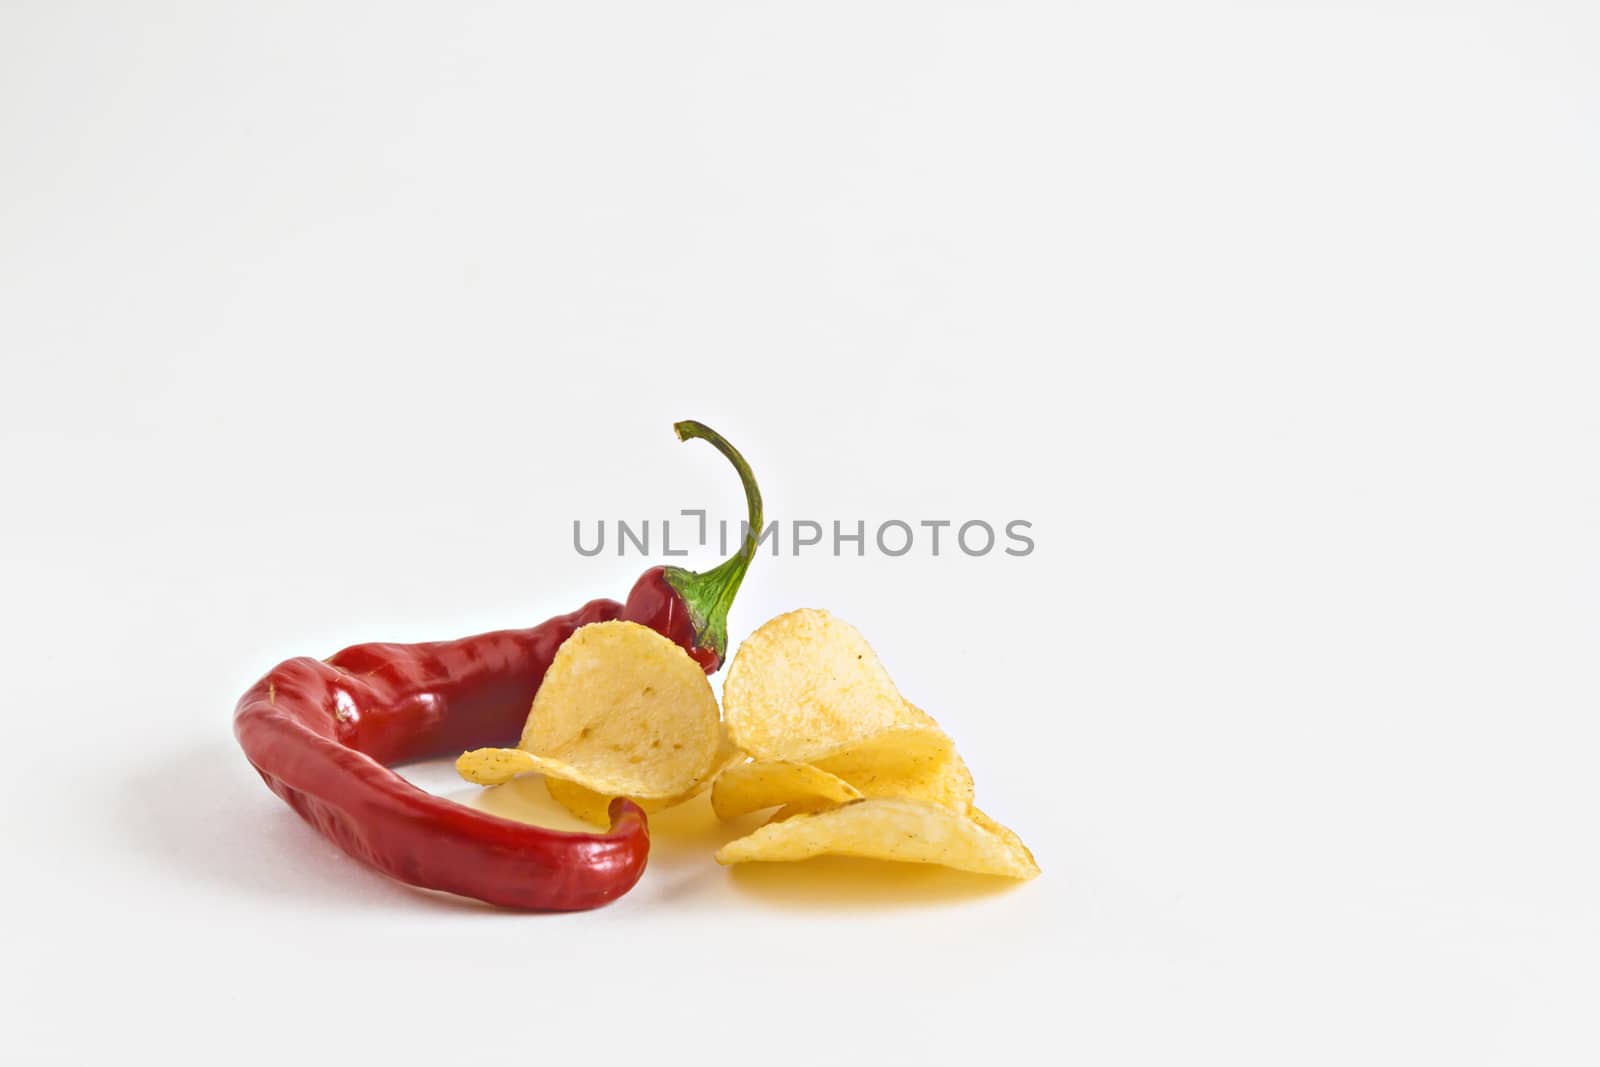 potato chips and chili in isolated white plate.